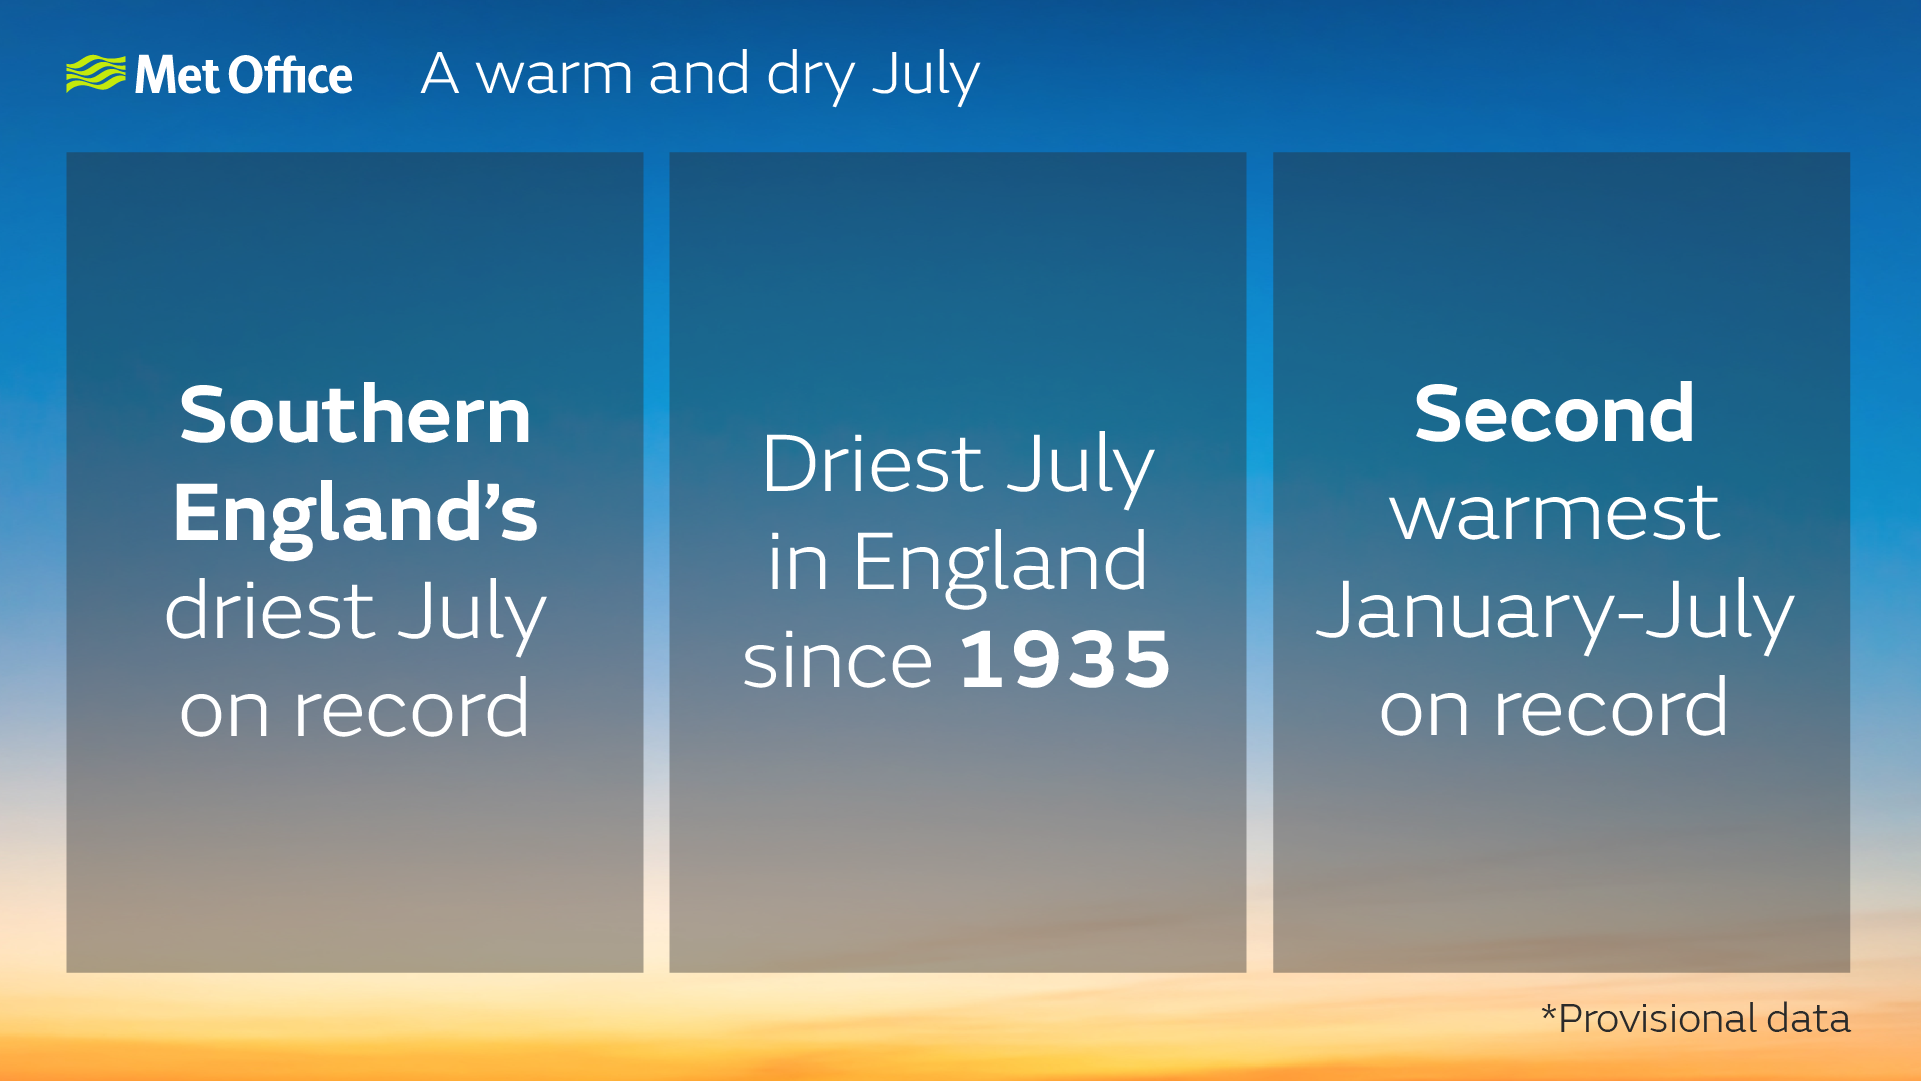 Graphic says southern England's driest July on record. Driest July in England since 1935 and second warmest Jan-July on record.